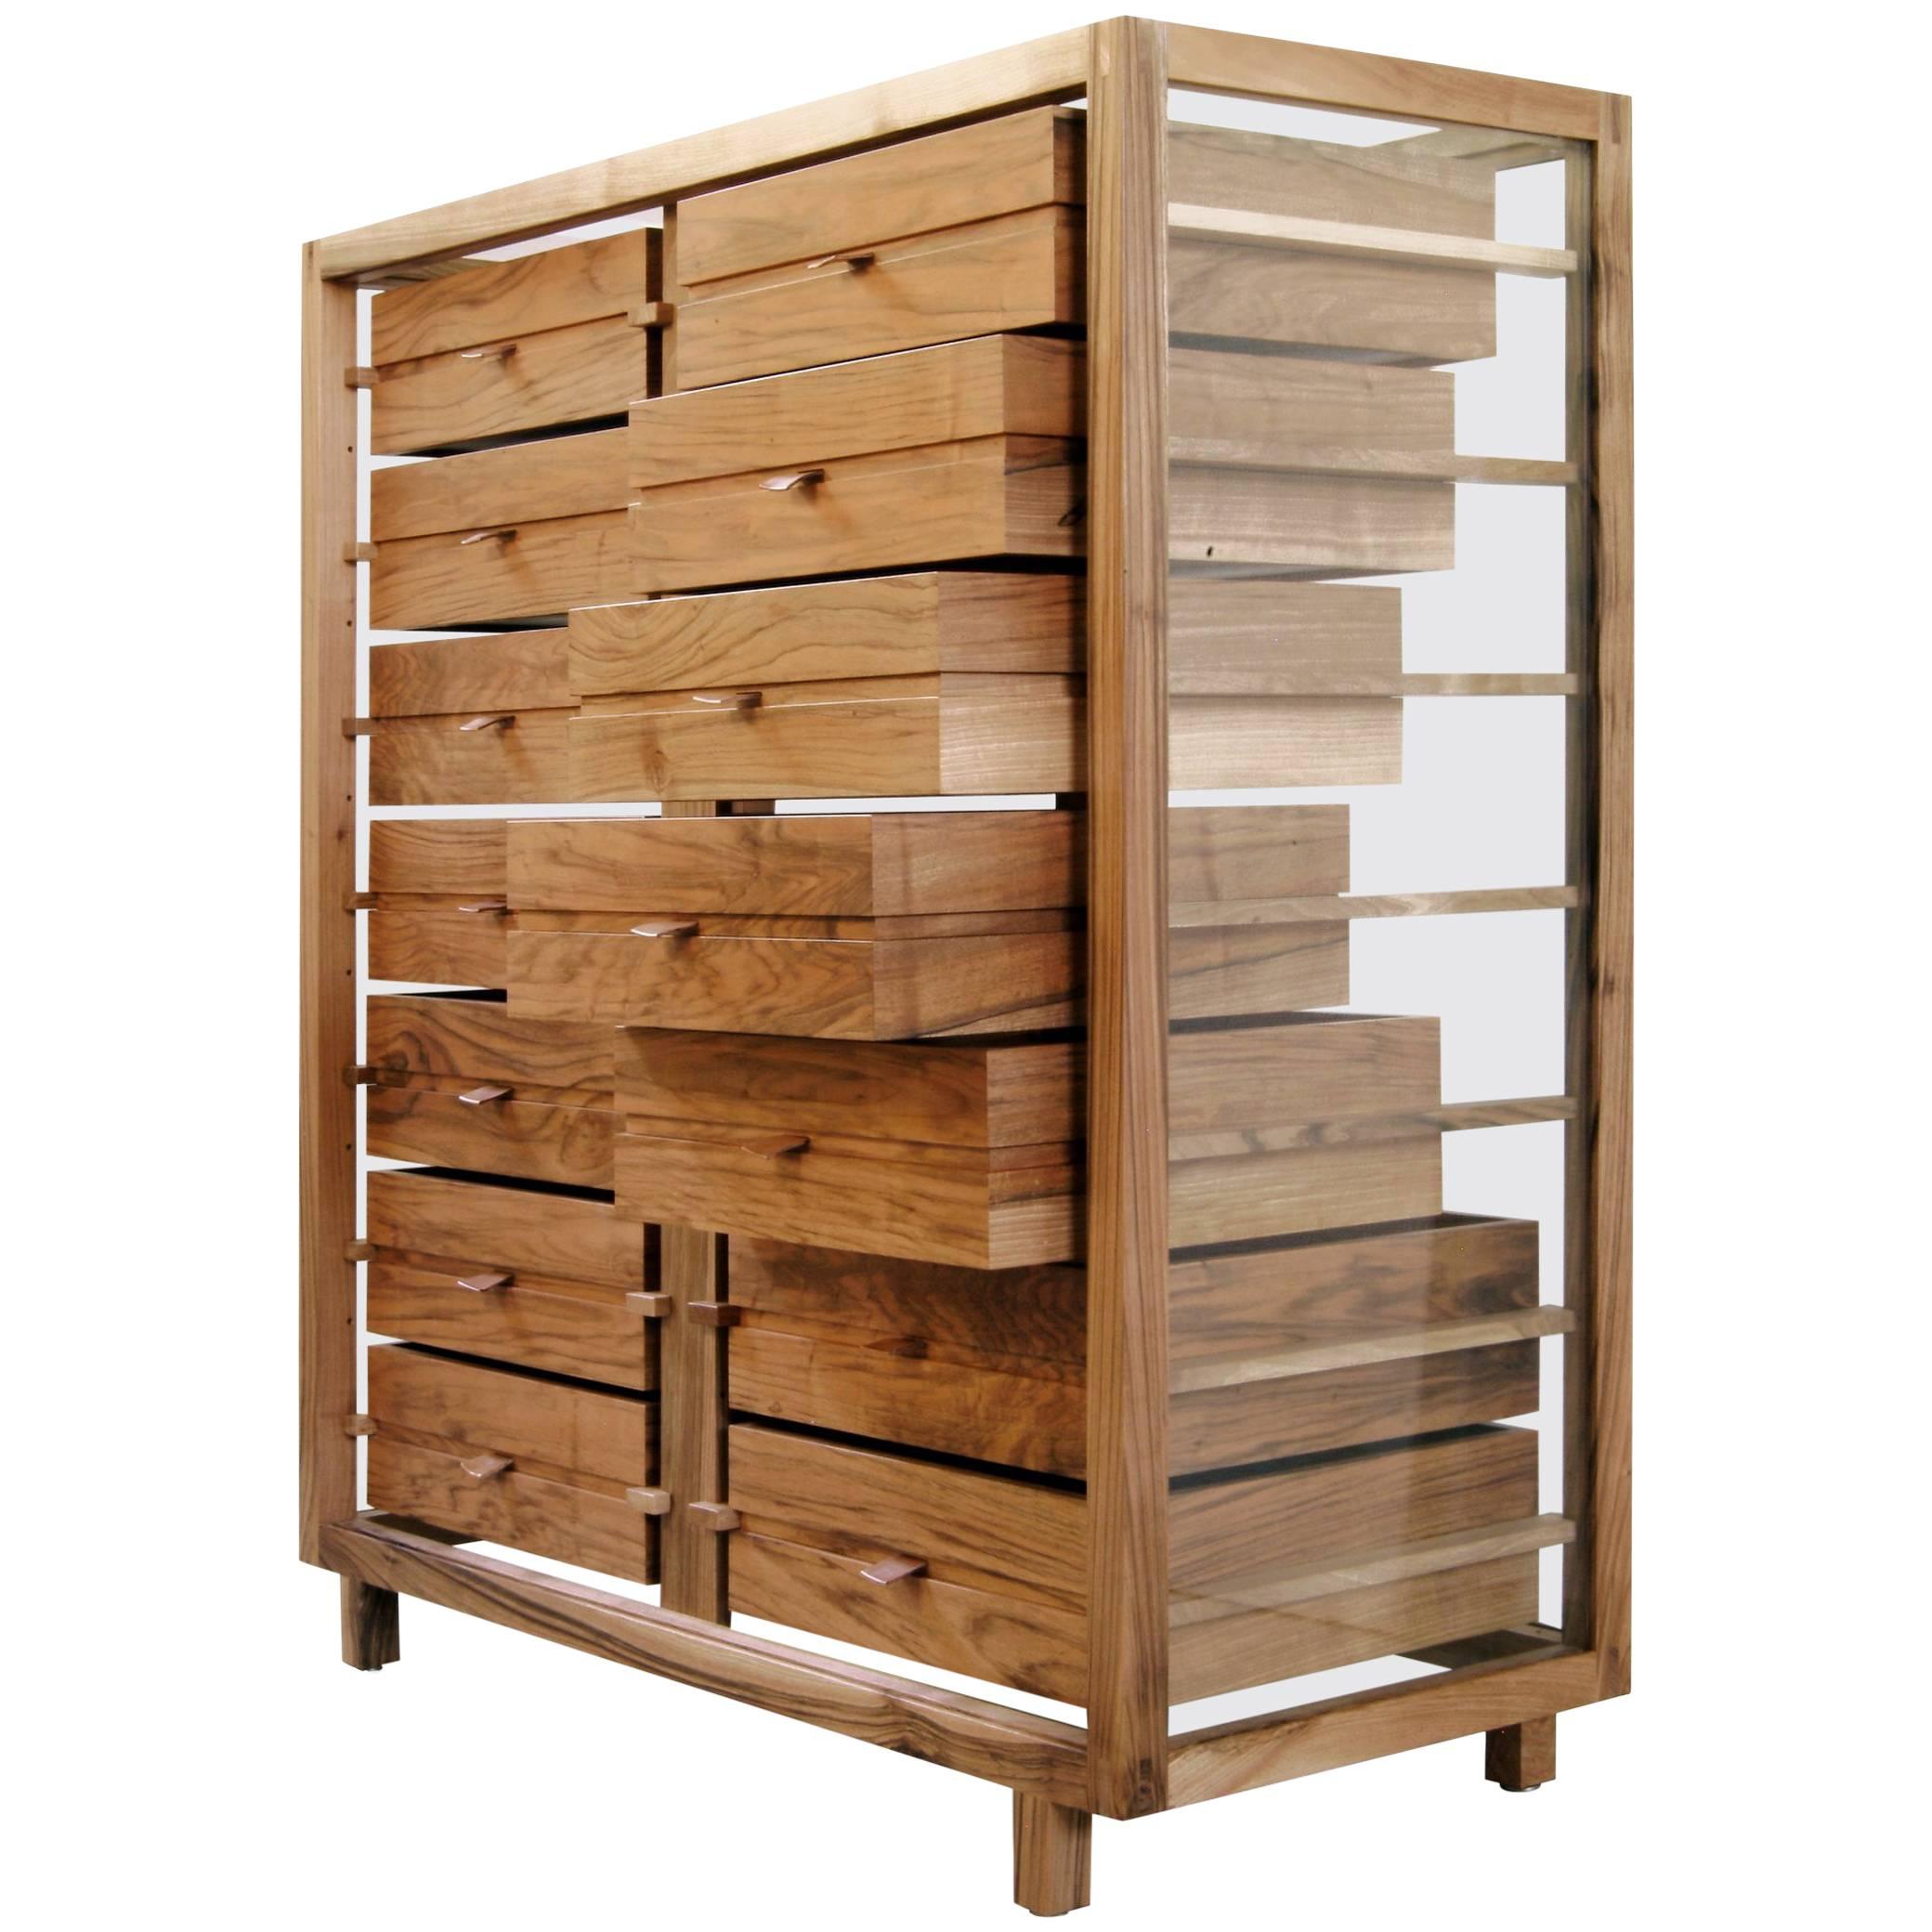 "Optimum" Glass and Walnut Chest of 14 Drawers by Stephane Lebrun for Dessie'